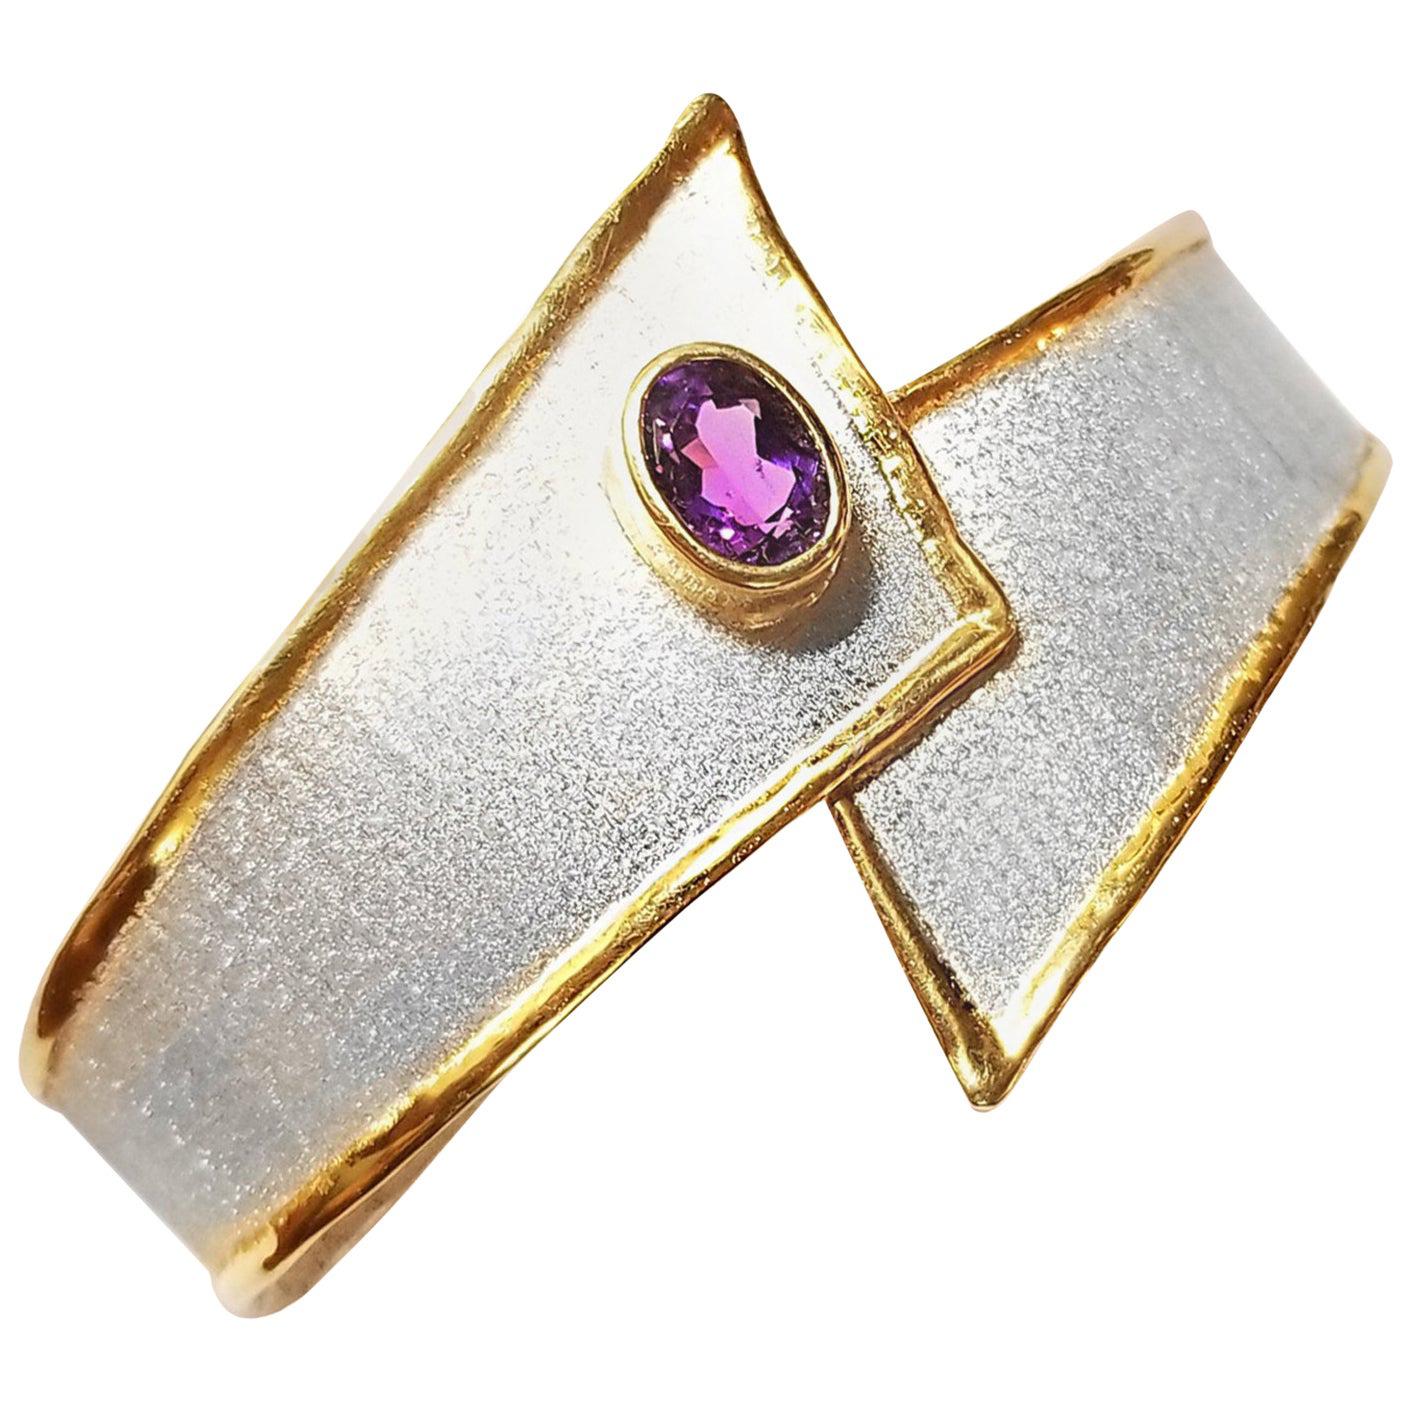 Yianni Creations Fine Silver and Gold 24 Karat Edges Two-Tone with Amethyst